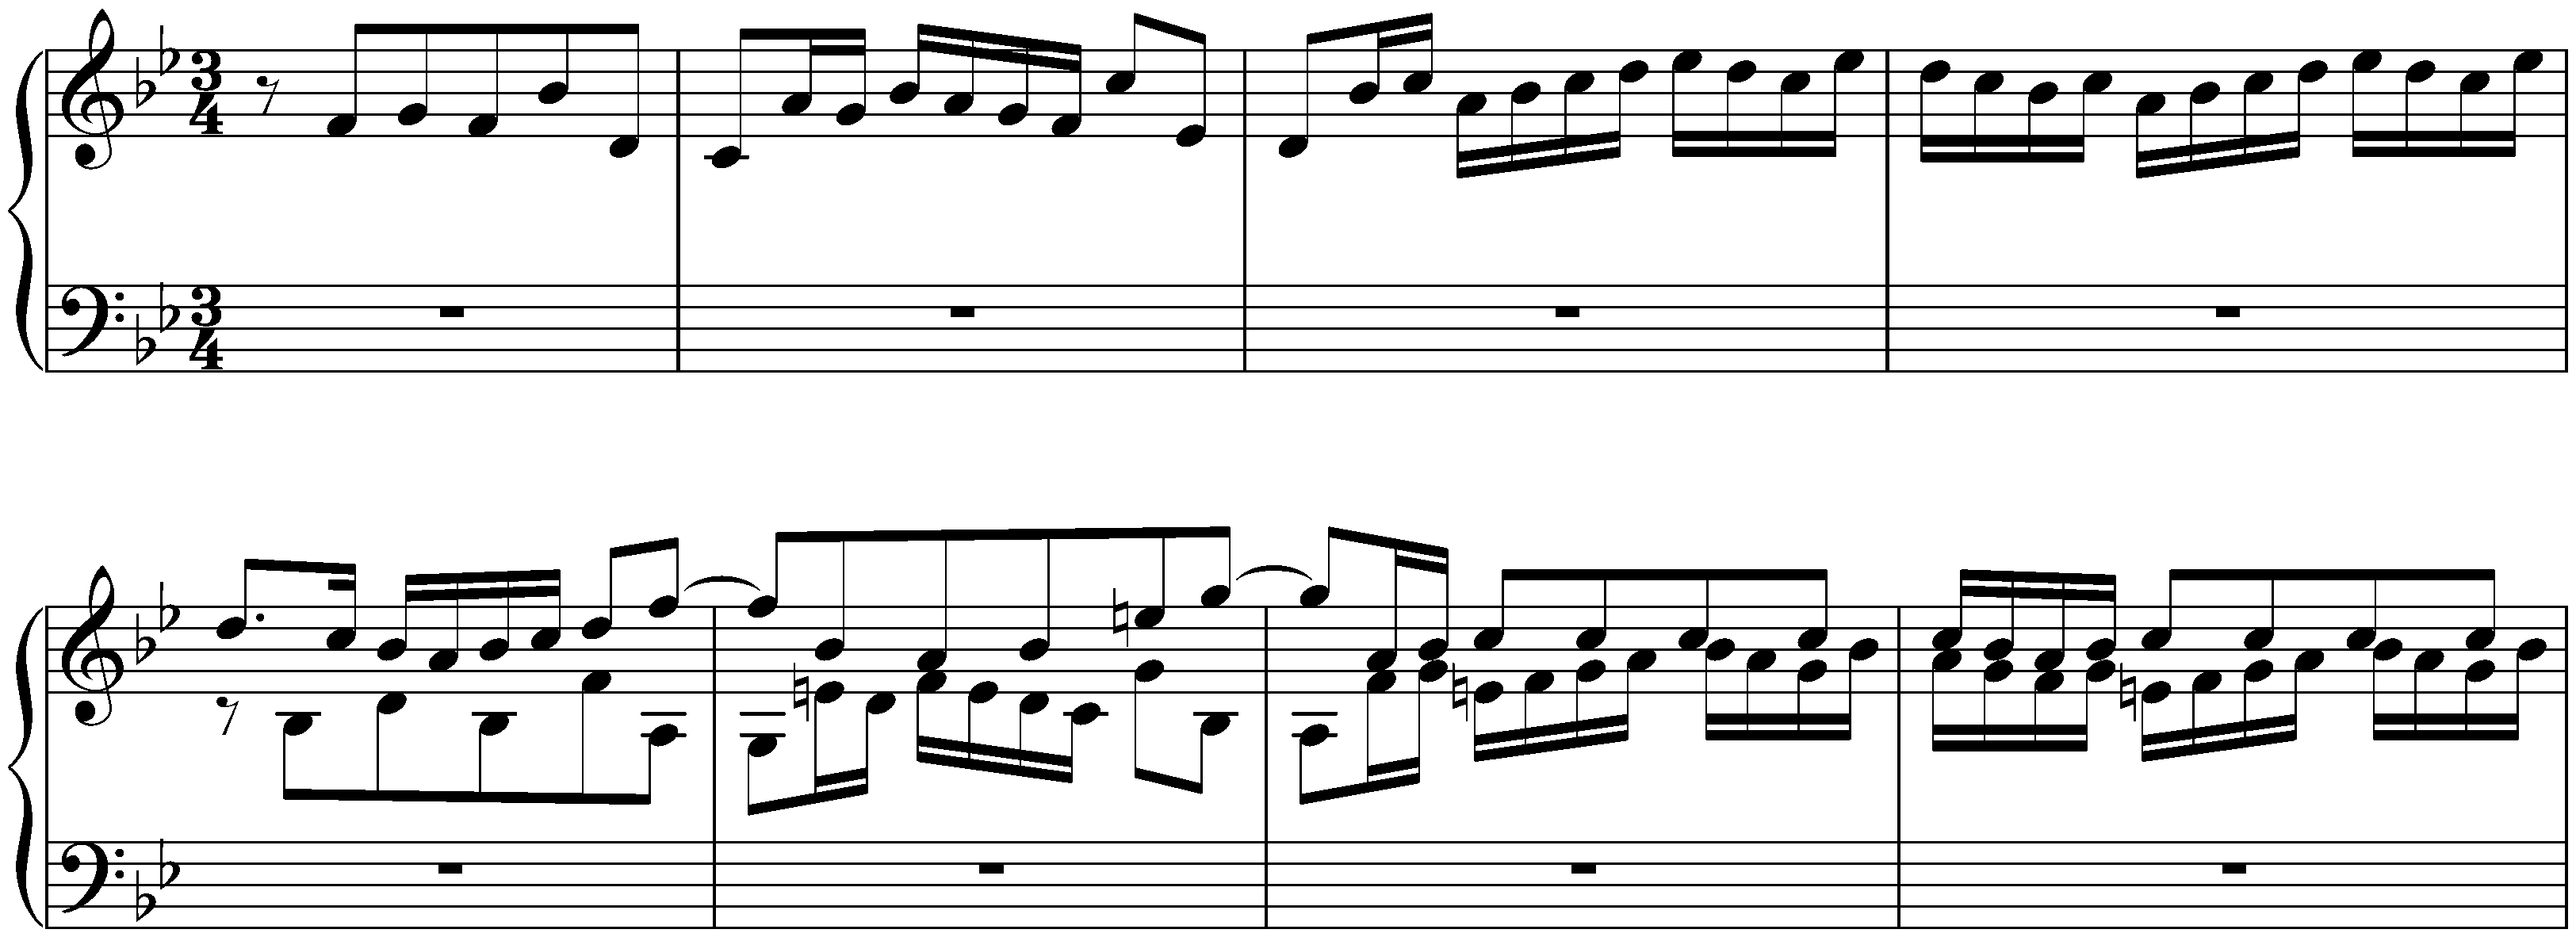 The Well-Tempered Clavier, Book 1, BWV 846–869; 21. B-flat major, BWV 866, Fugue